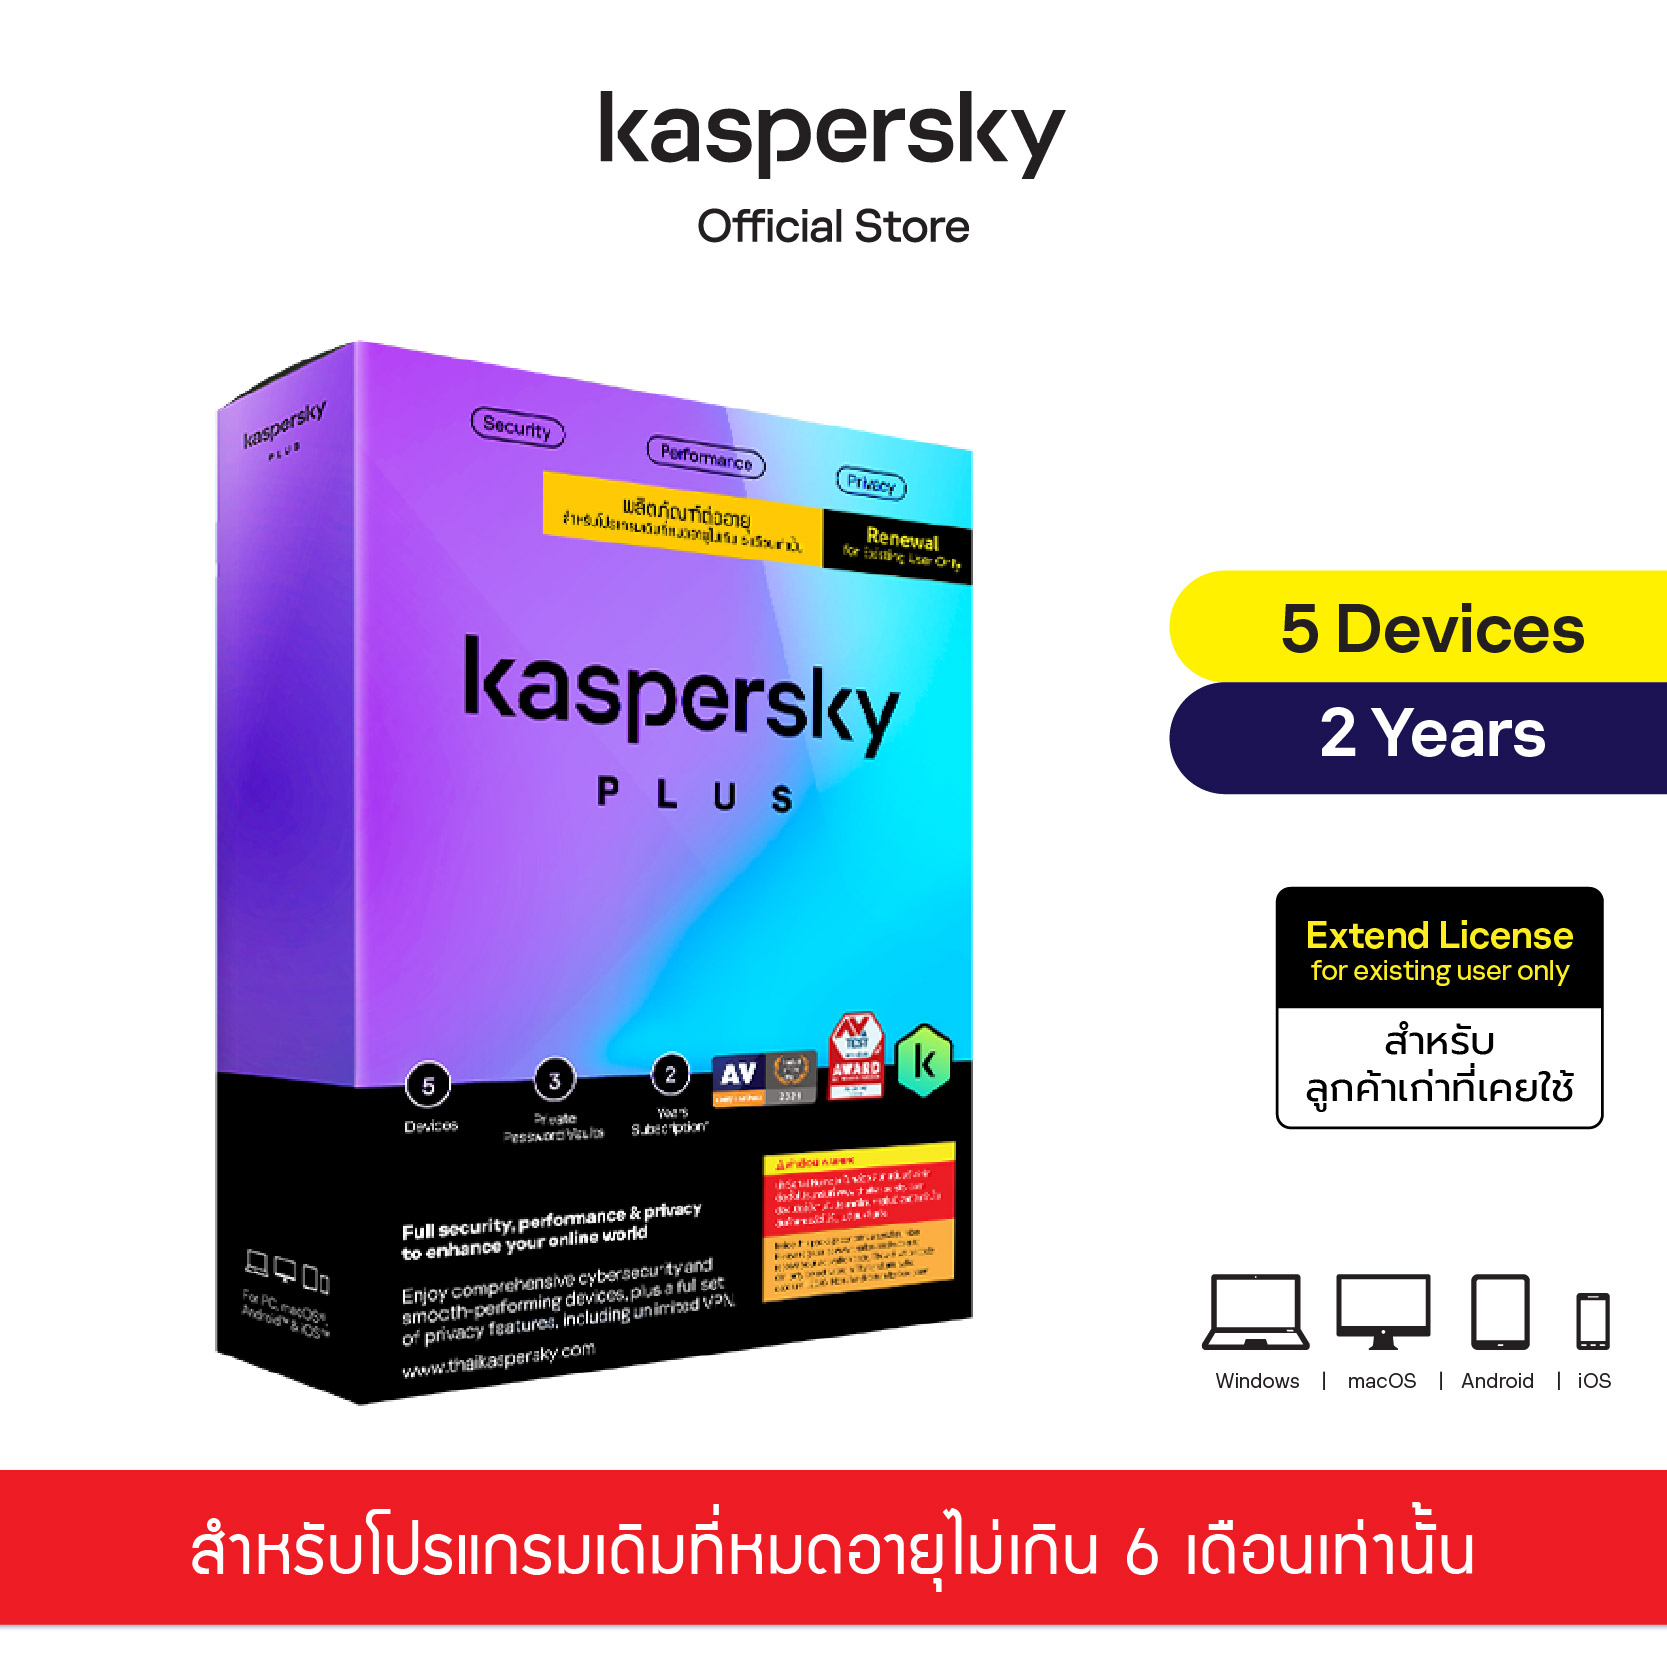 Kaspersky Plus 5 Devices 2 Year (Extend License)